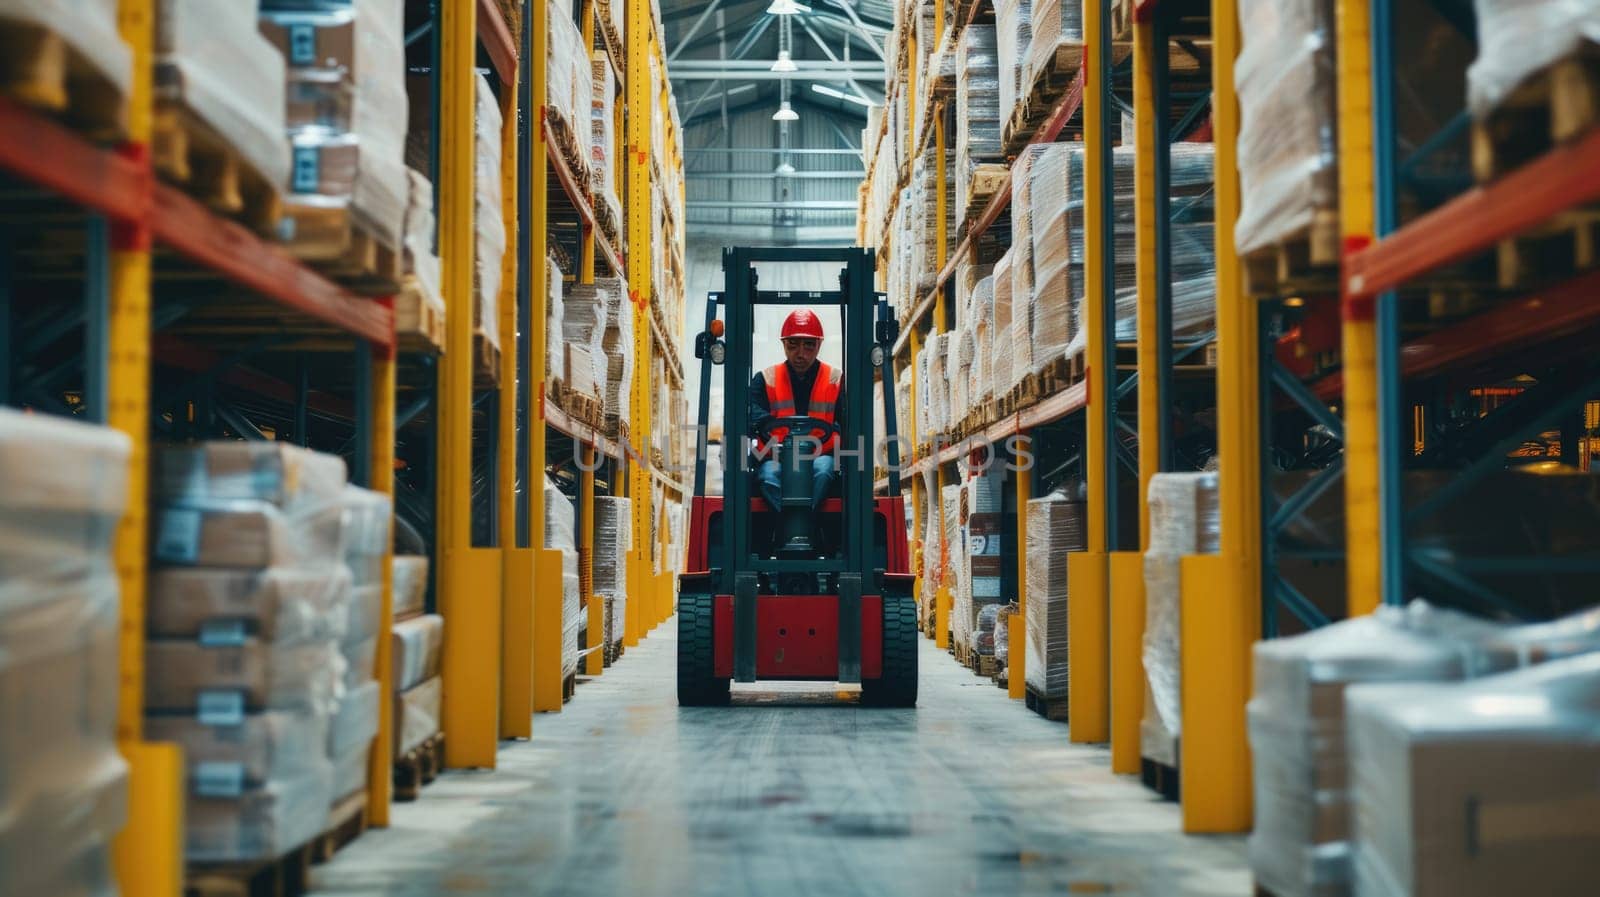 A forklift driver operates in a warehouse building. AIG41 by biancoblue